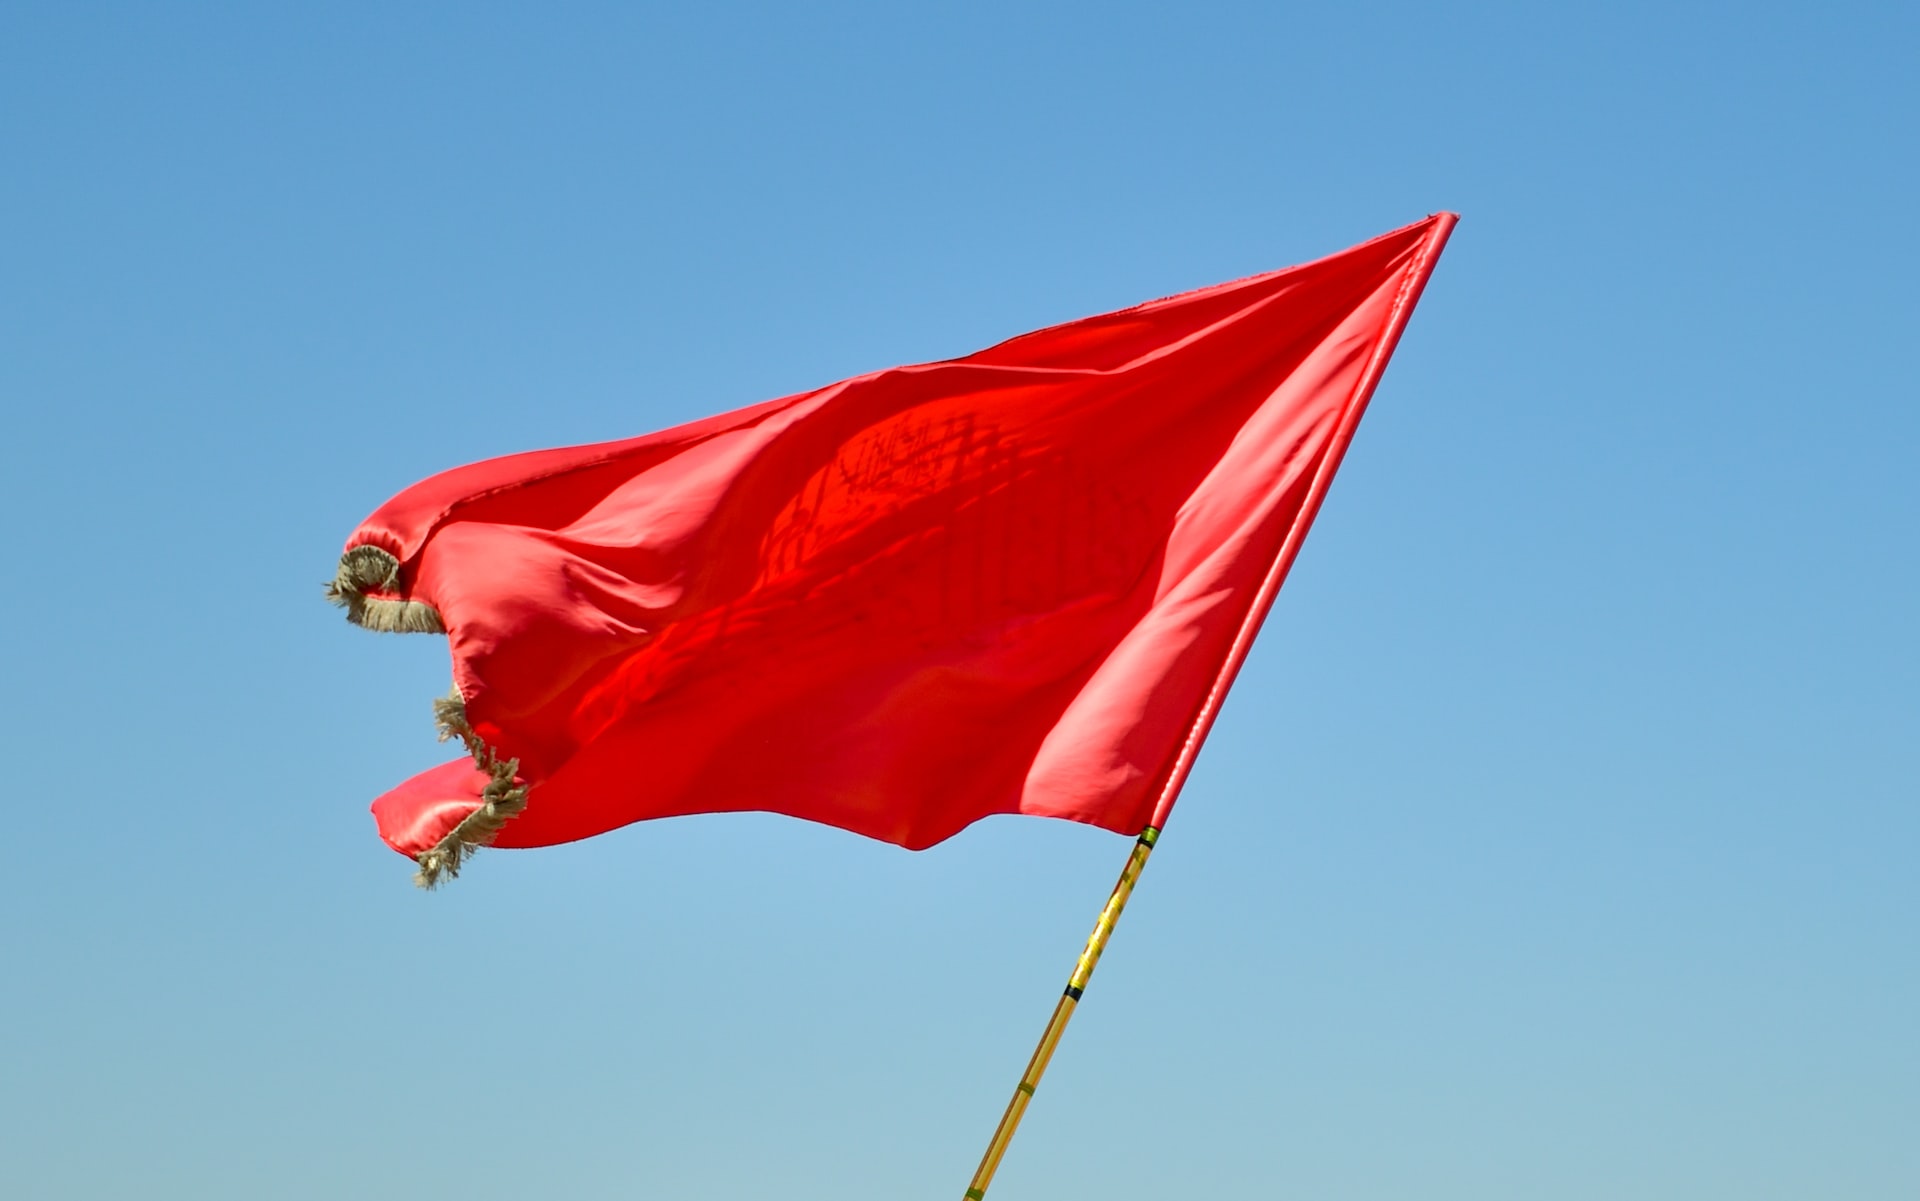 Red flag blows in the wind with blue sky behind, showing idea that writers should be wary of book publisher red flags.